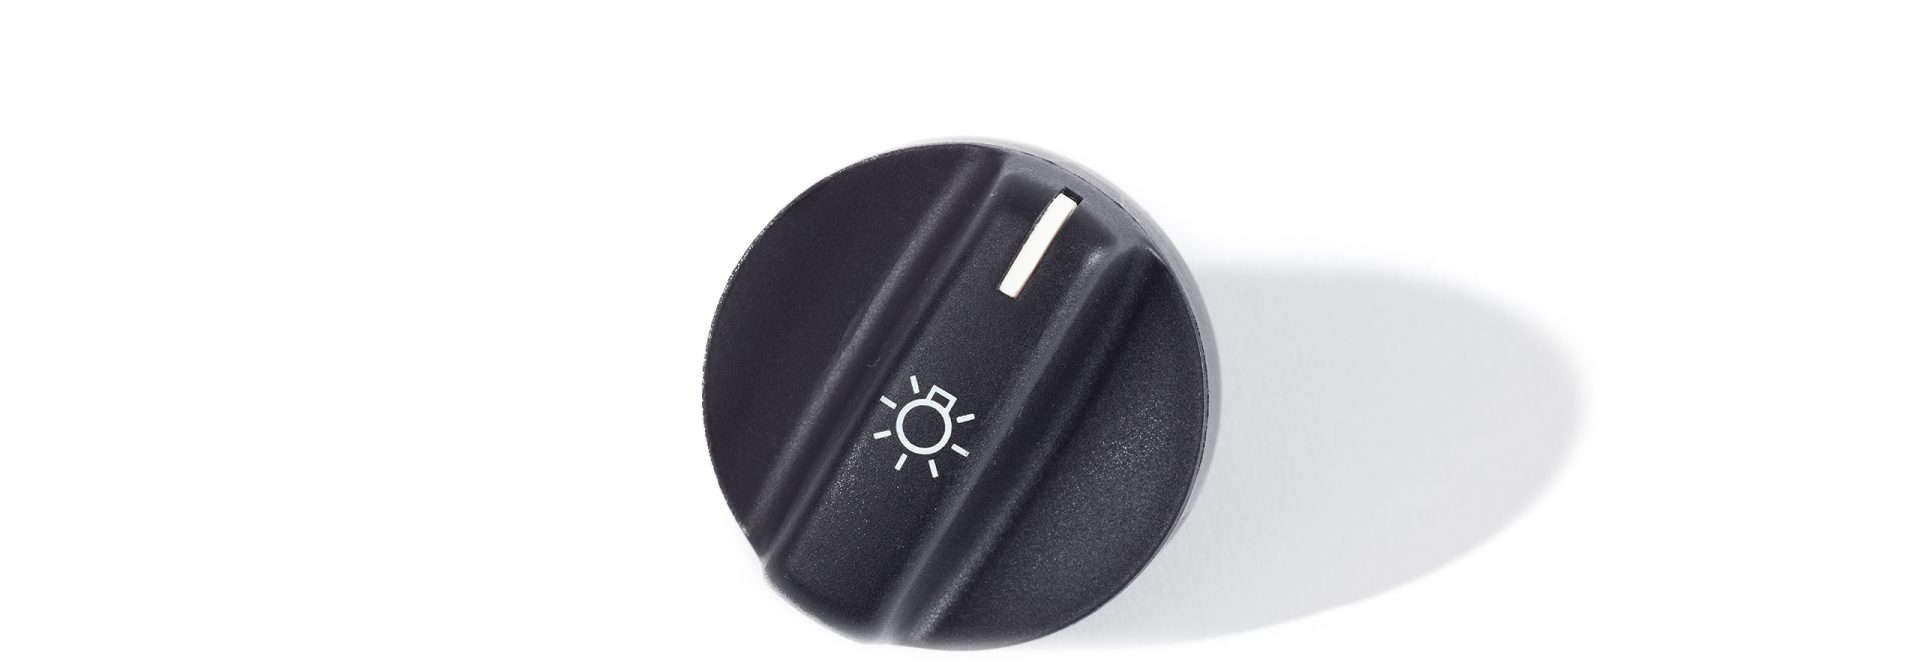 BMW Classic reproduction light switch button